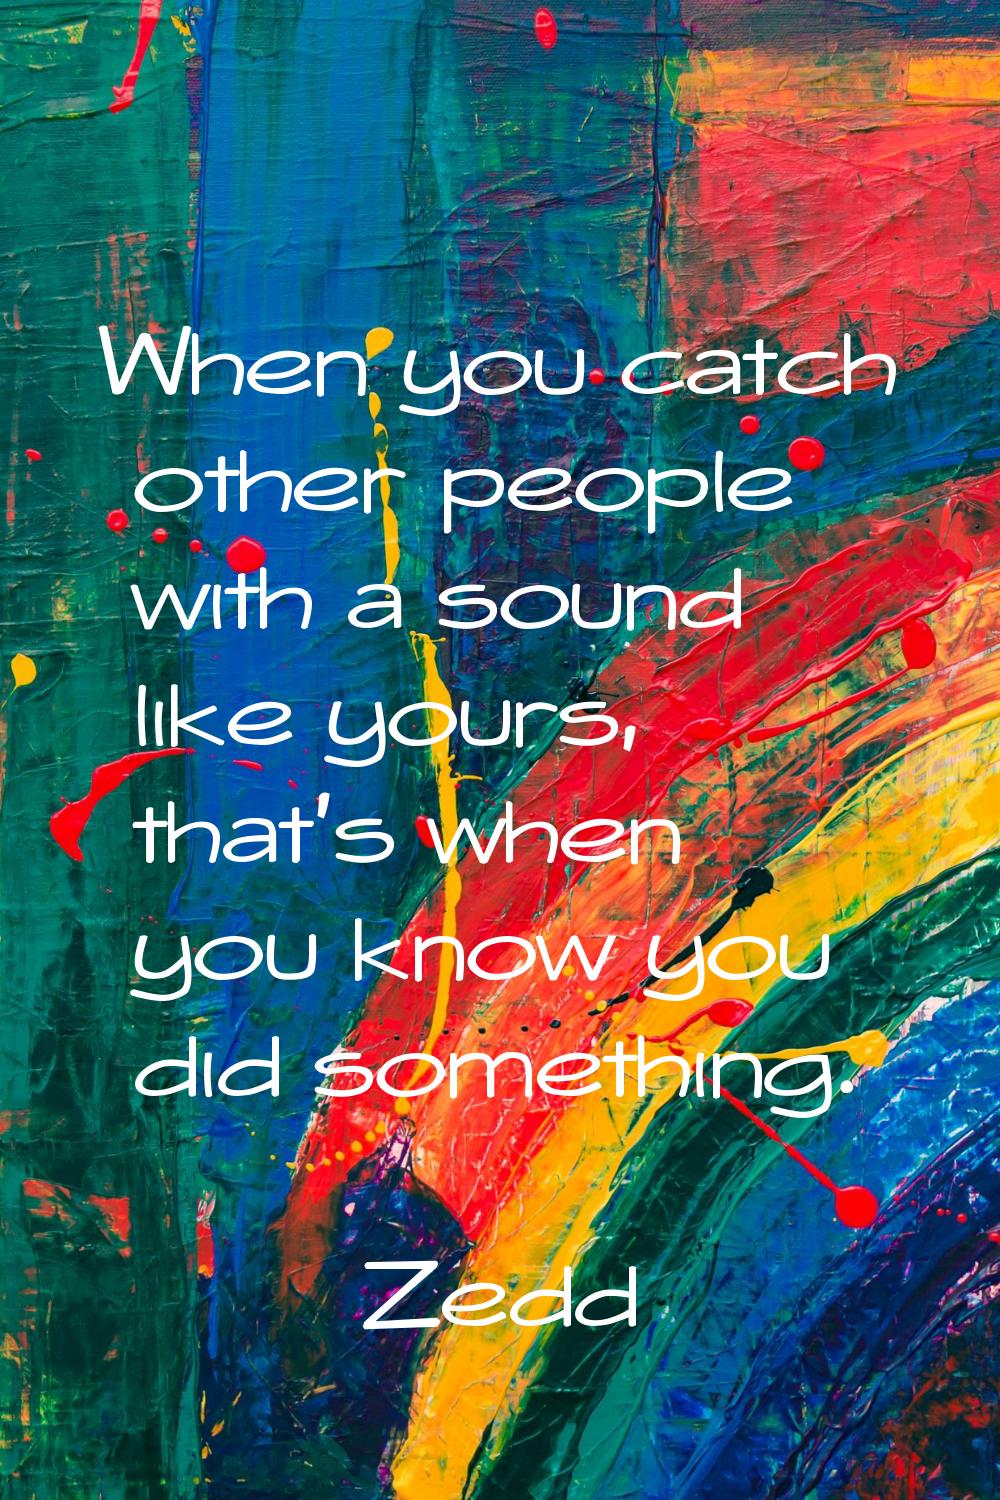 When you catch other people with a sound like yours, that's when you know you did something.